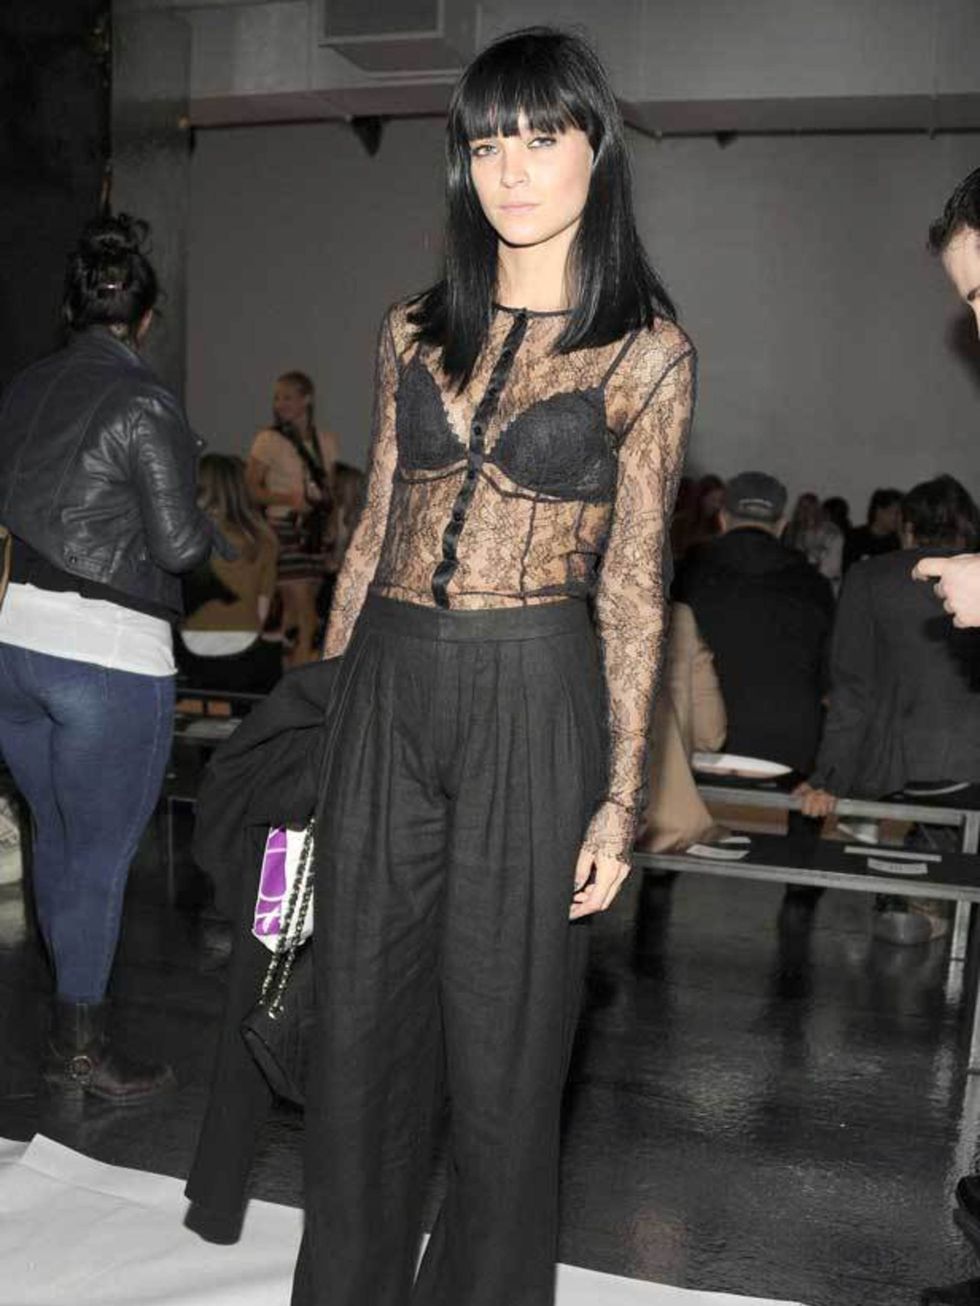 <p><a href="http://www.elleuk.com/starstyle/style-files/(section)/leigh-lezark">Leigh Lezark</a> wearing a sheer lace blouse front row at the <a href="http://cms.elleuk.com/catwalk/collections/kanye-west/">Kanye West</a> SS12 show, October 2011</p>